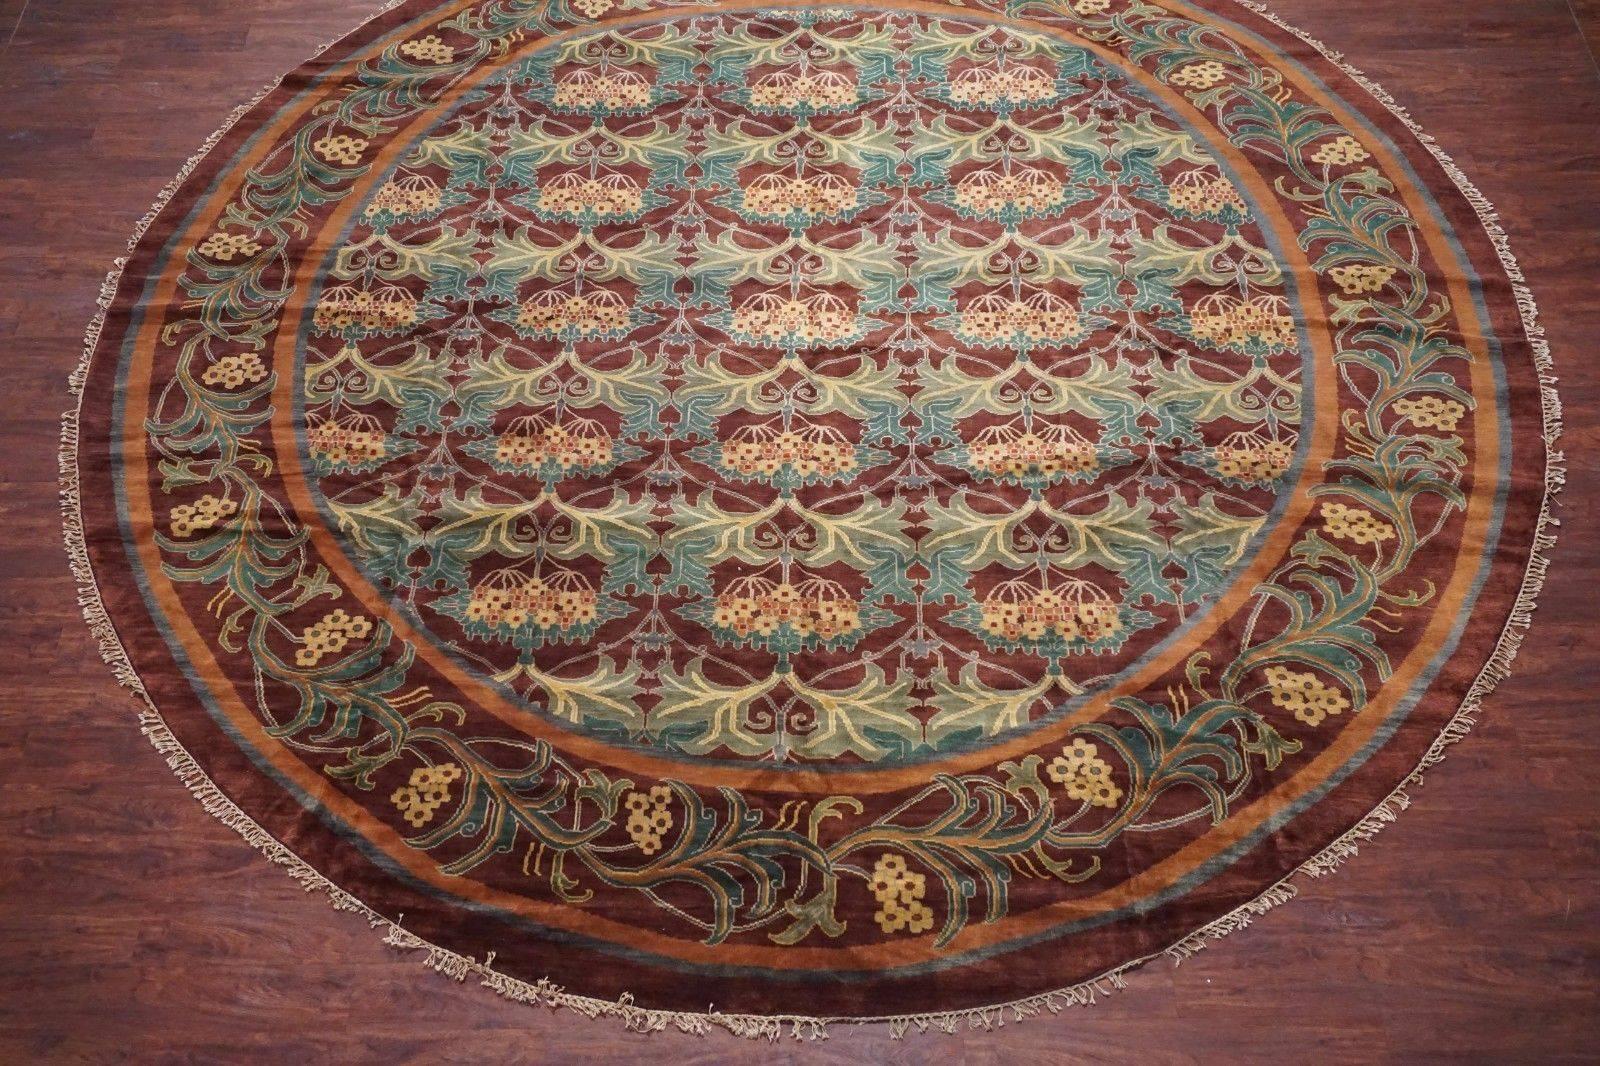 Round William Morris style rug, signed by weaver. 

circa 1990

Measures: 13' 9